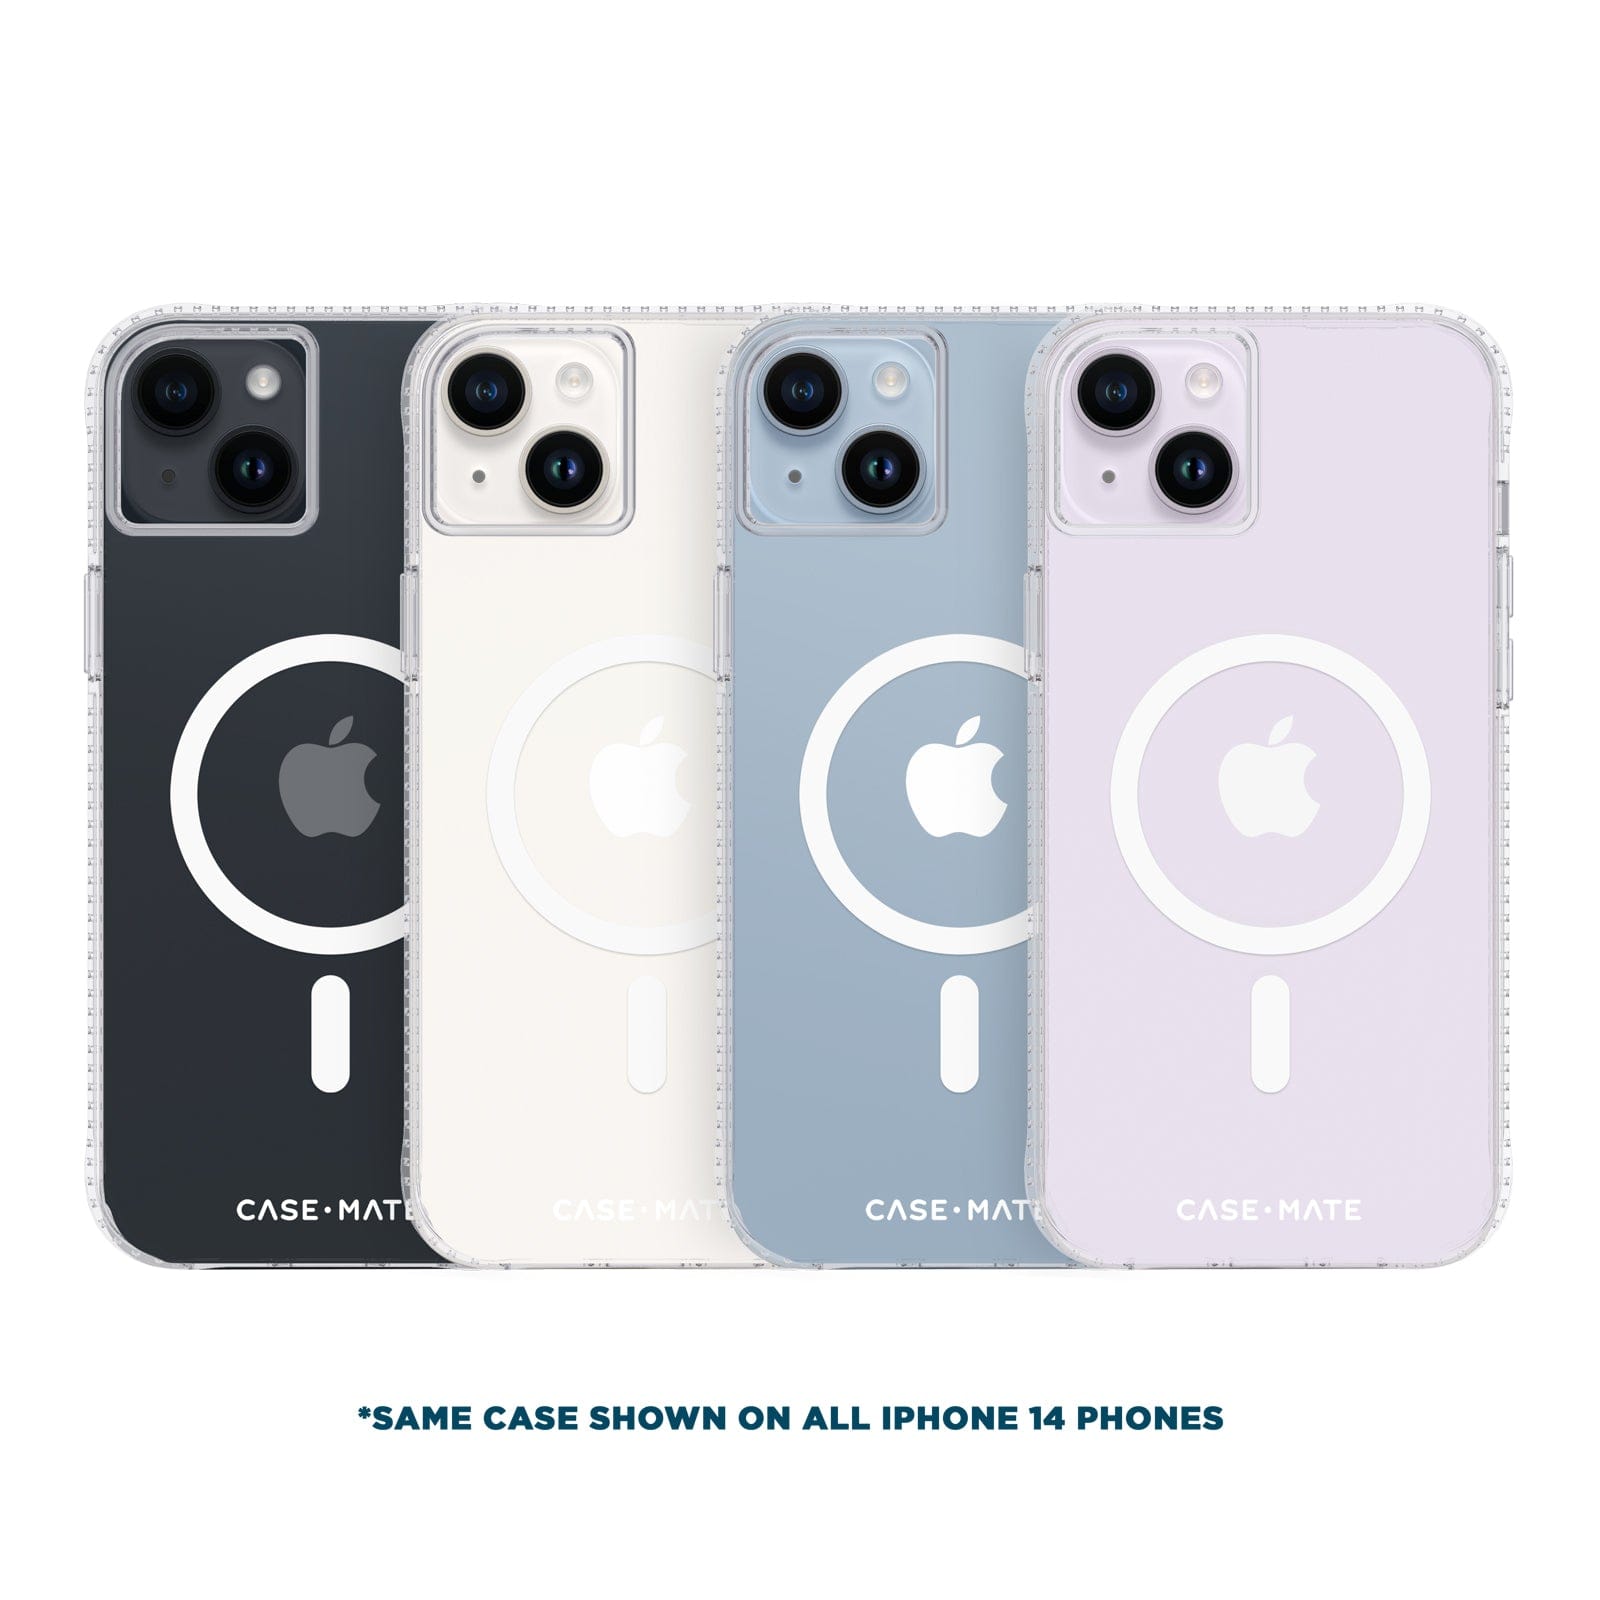 *SAME CASE SHOWN ON ALL IPHONE 14 PHONES